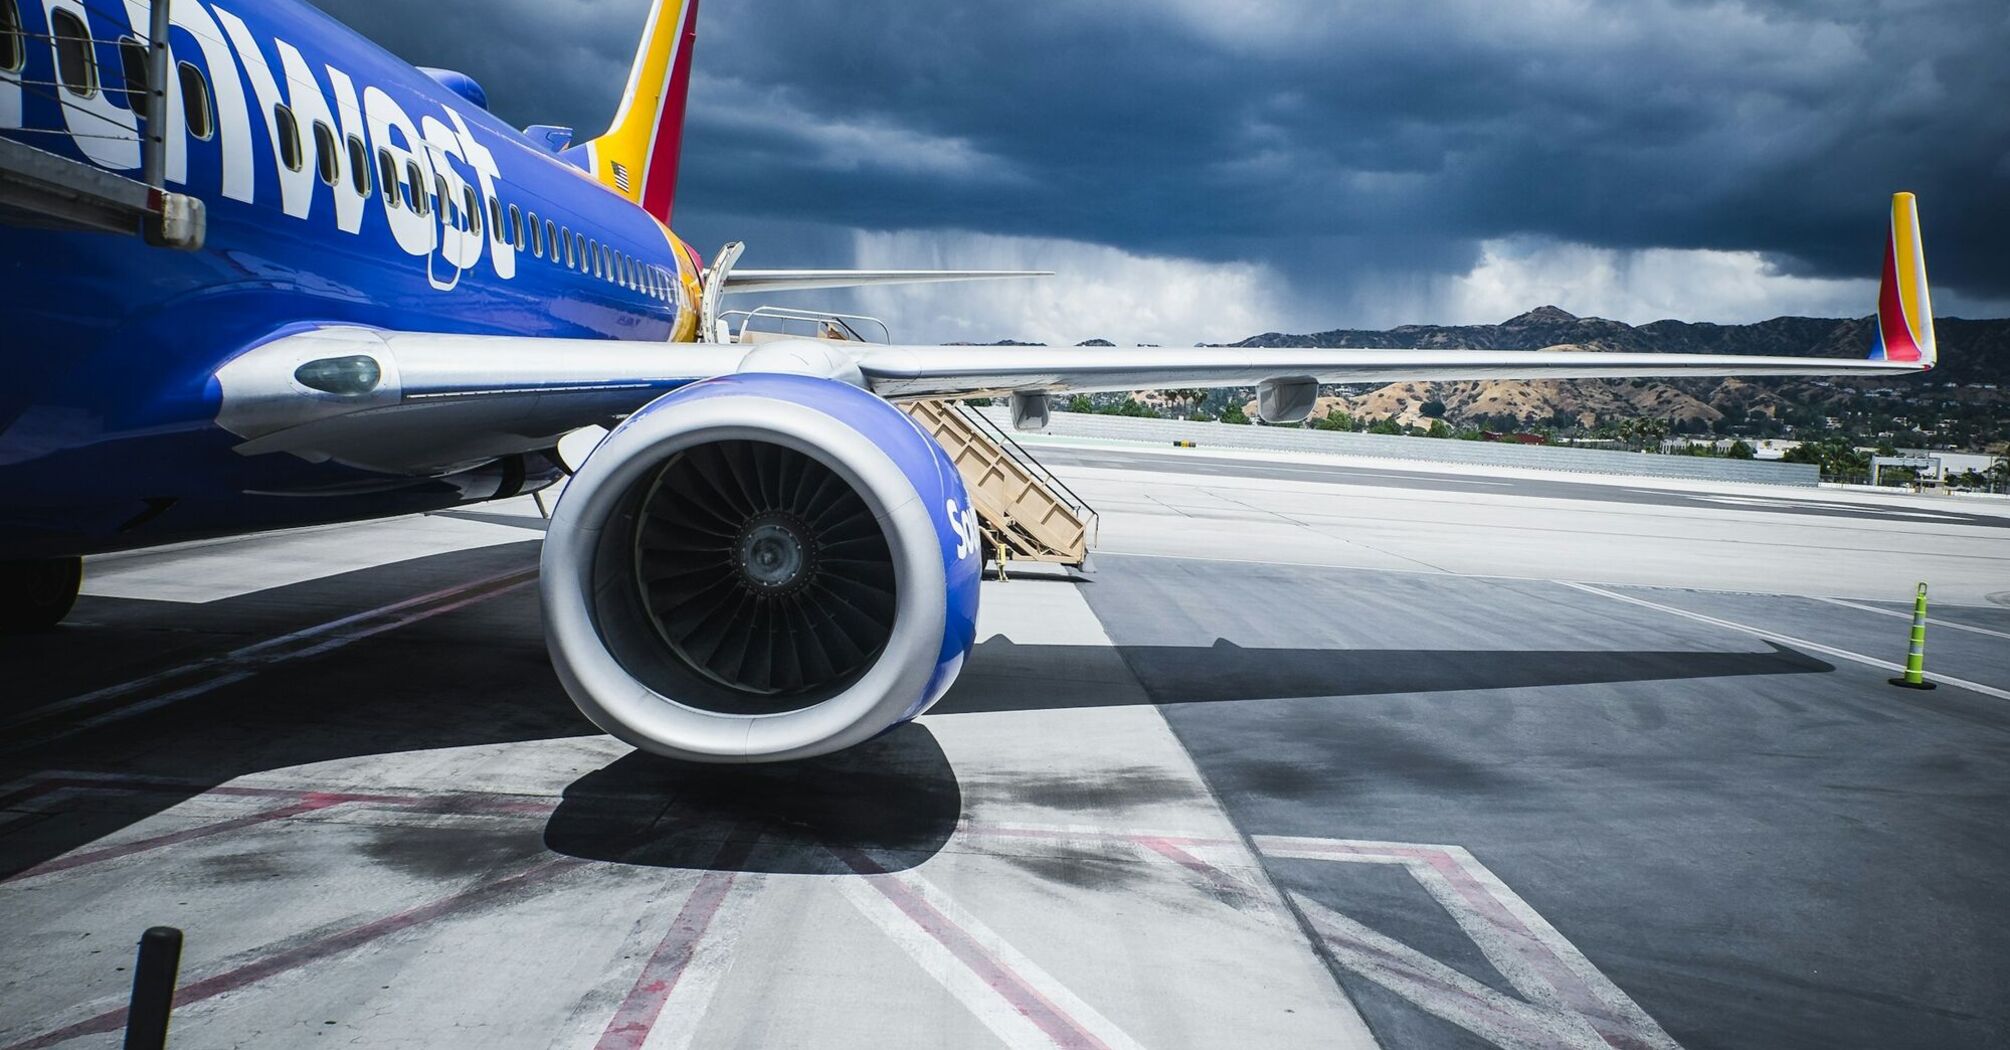 Southwest Airlines jet parked on tarmac under stormy skies